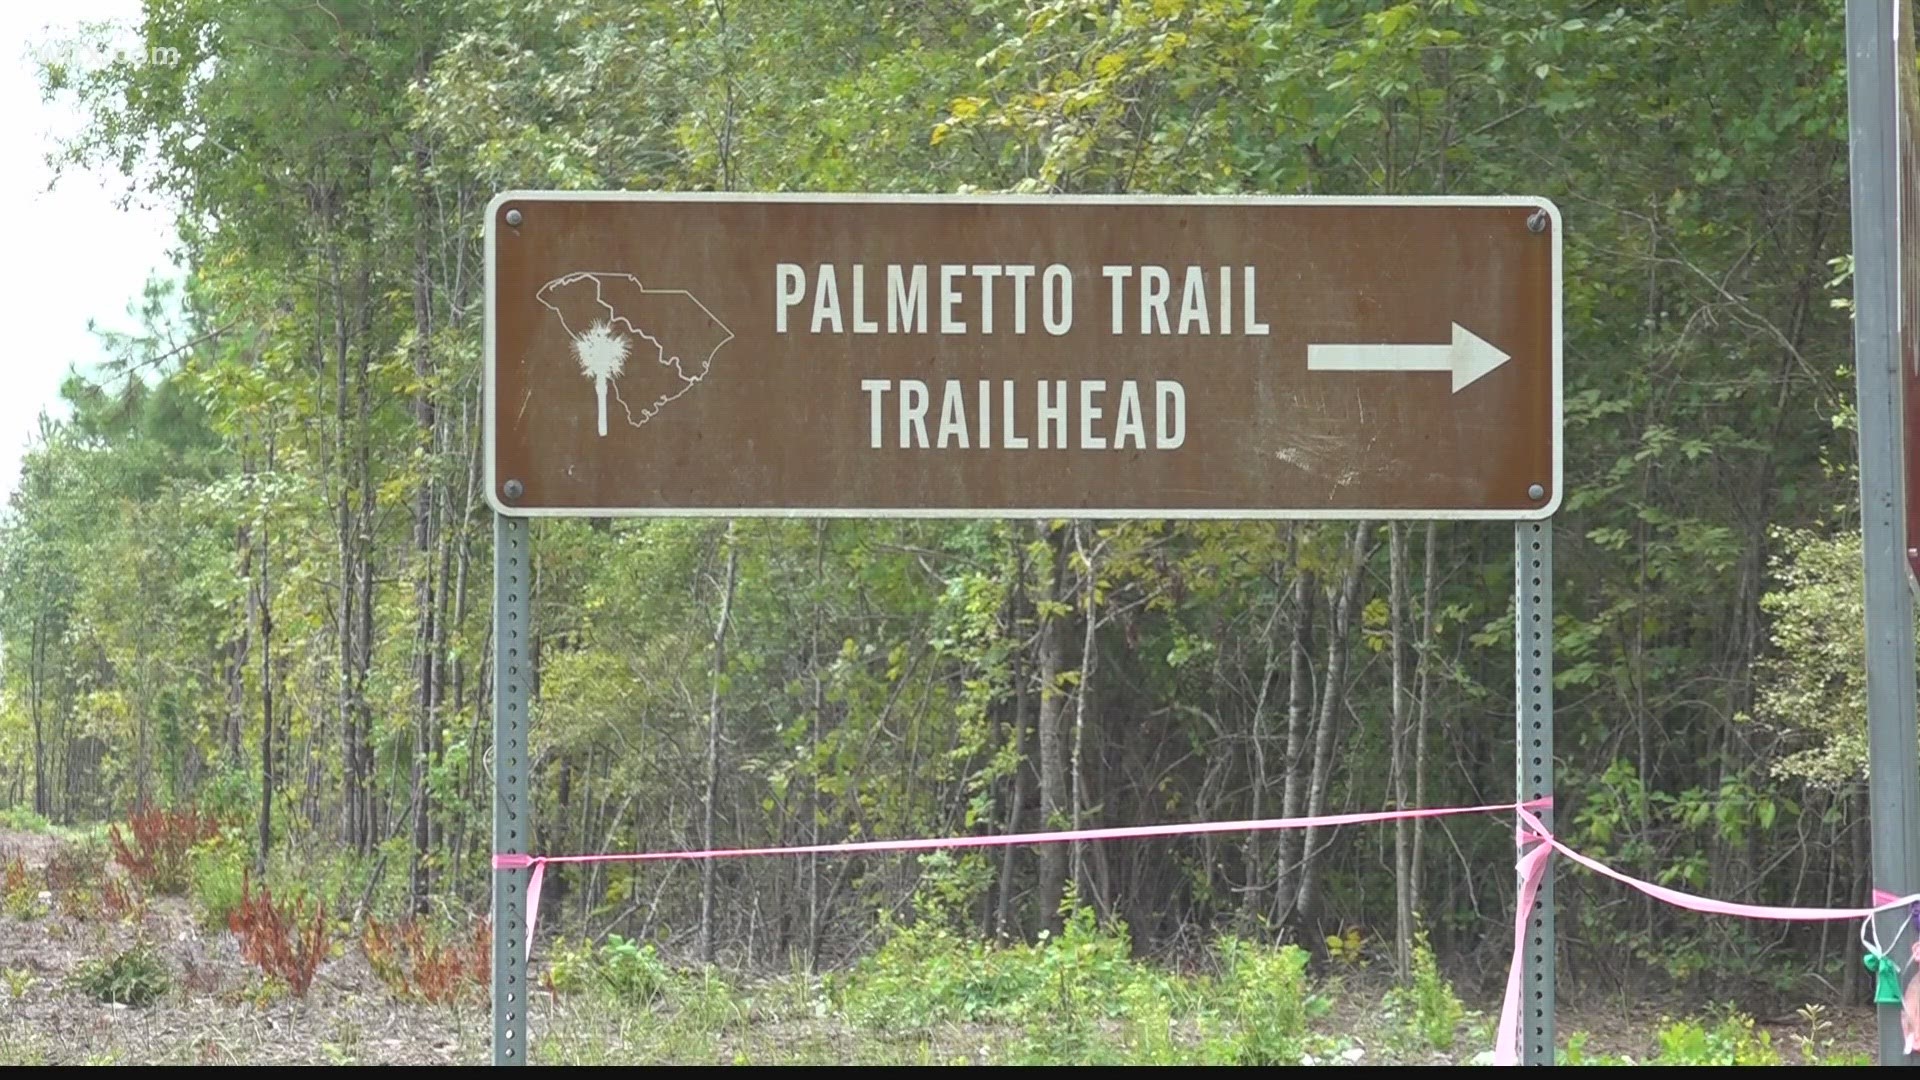 A new addition to the Sumter County trail adds historical perspective to the trail.